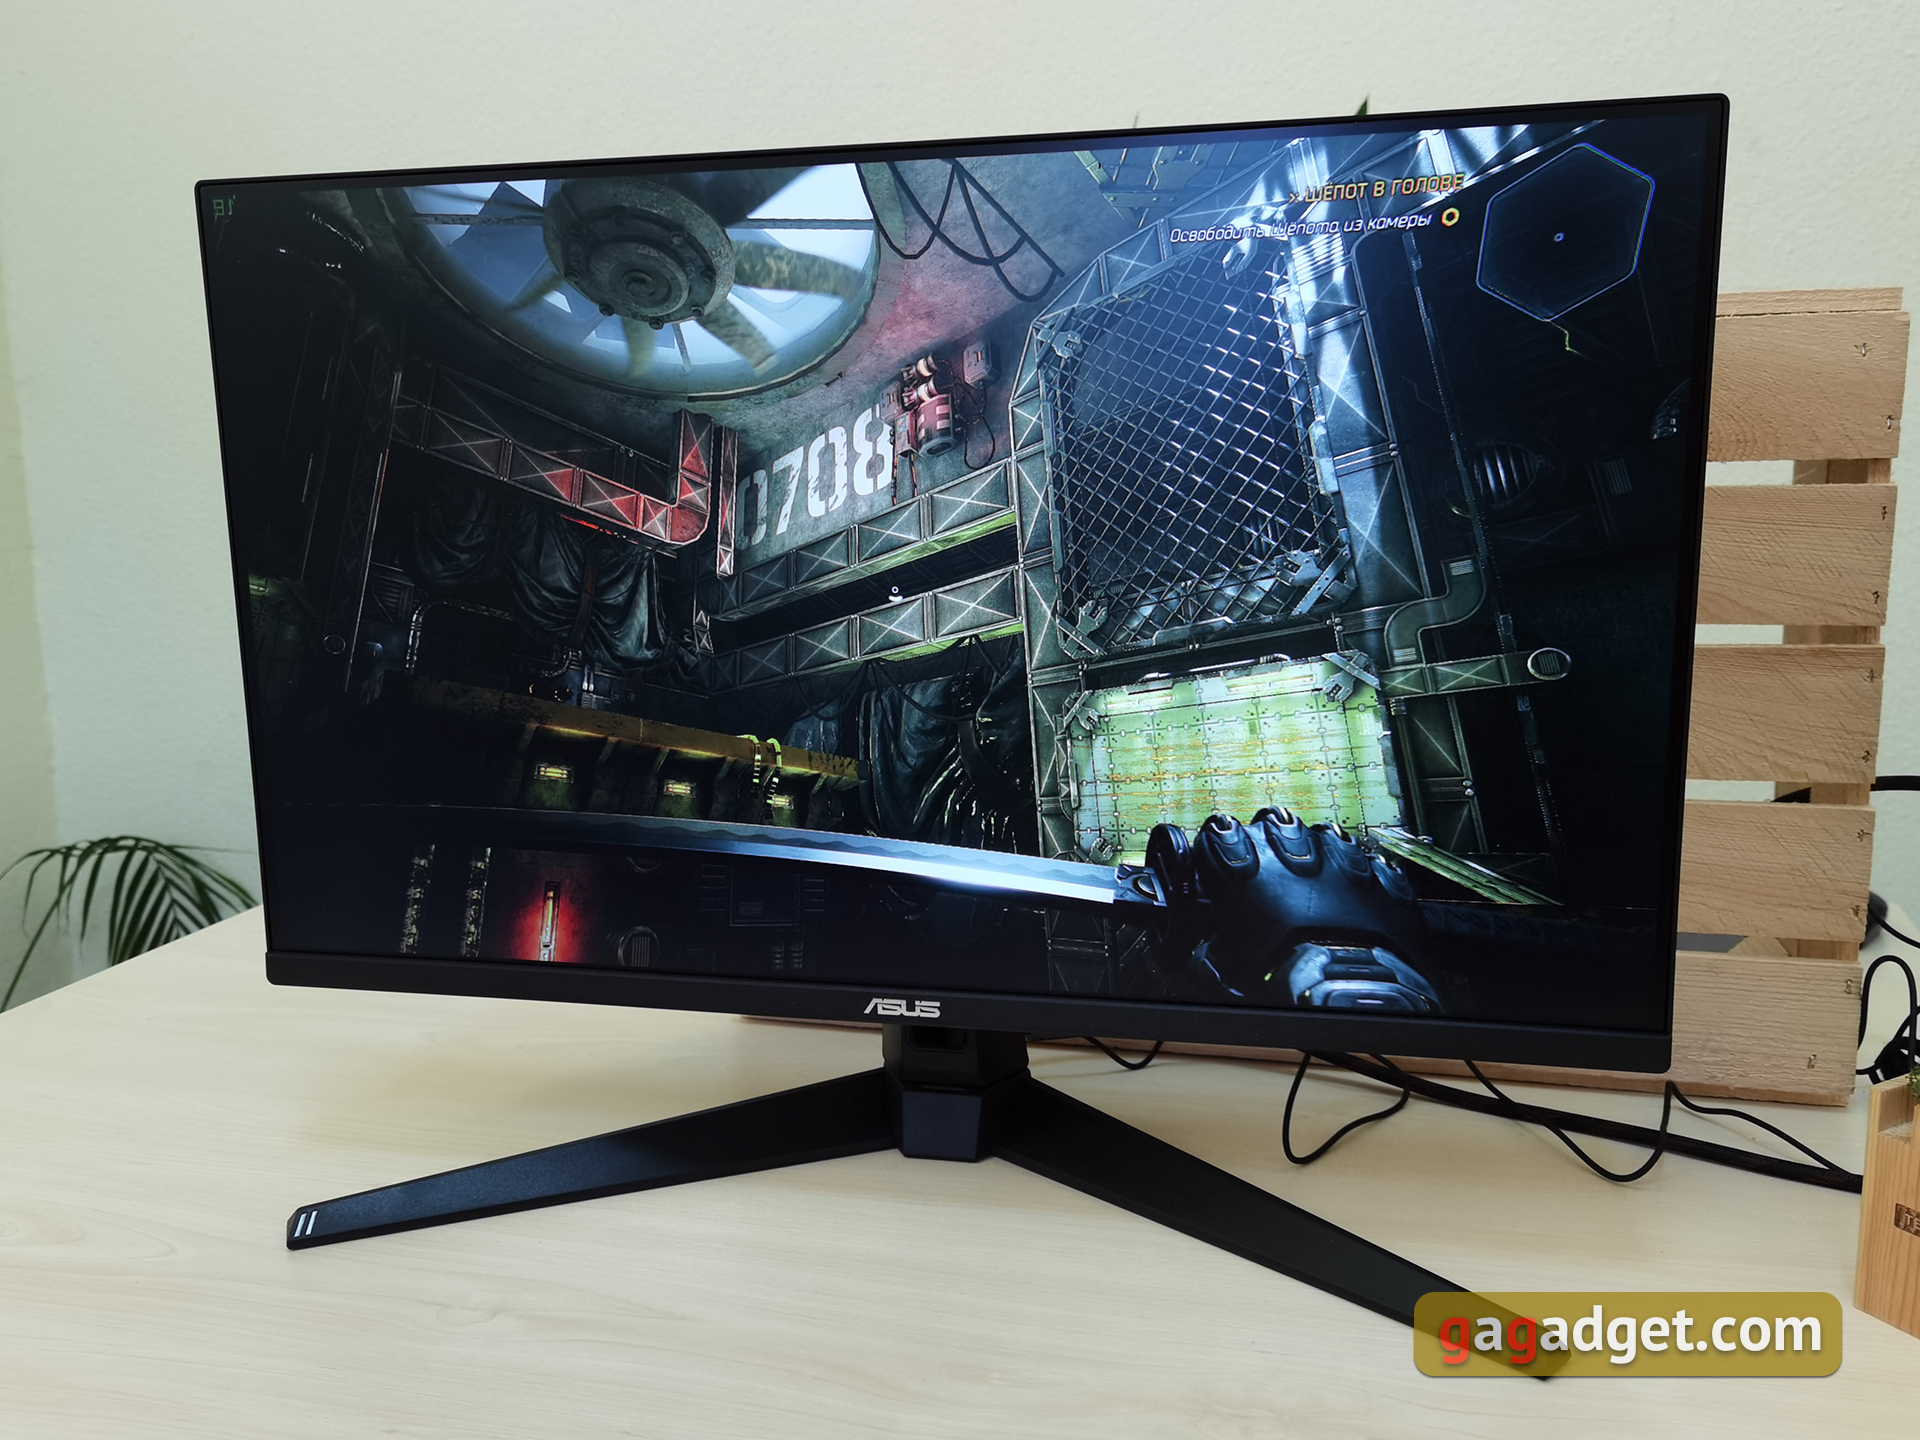 ASUS TUF Gaming VG279Q1A review: 27-inch gaming monitor with IPS panel and 165 Hz refresh rate-32